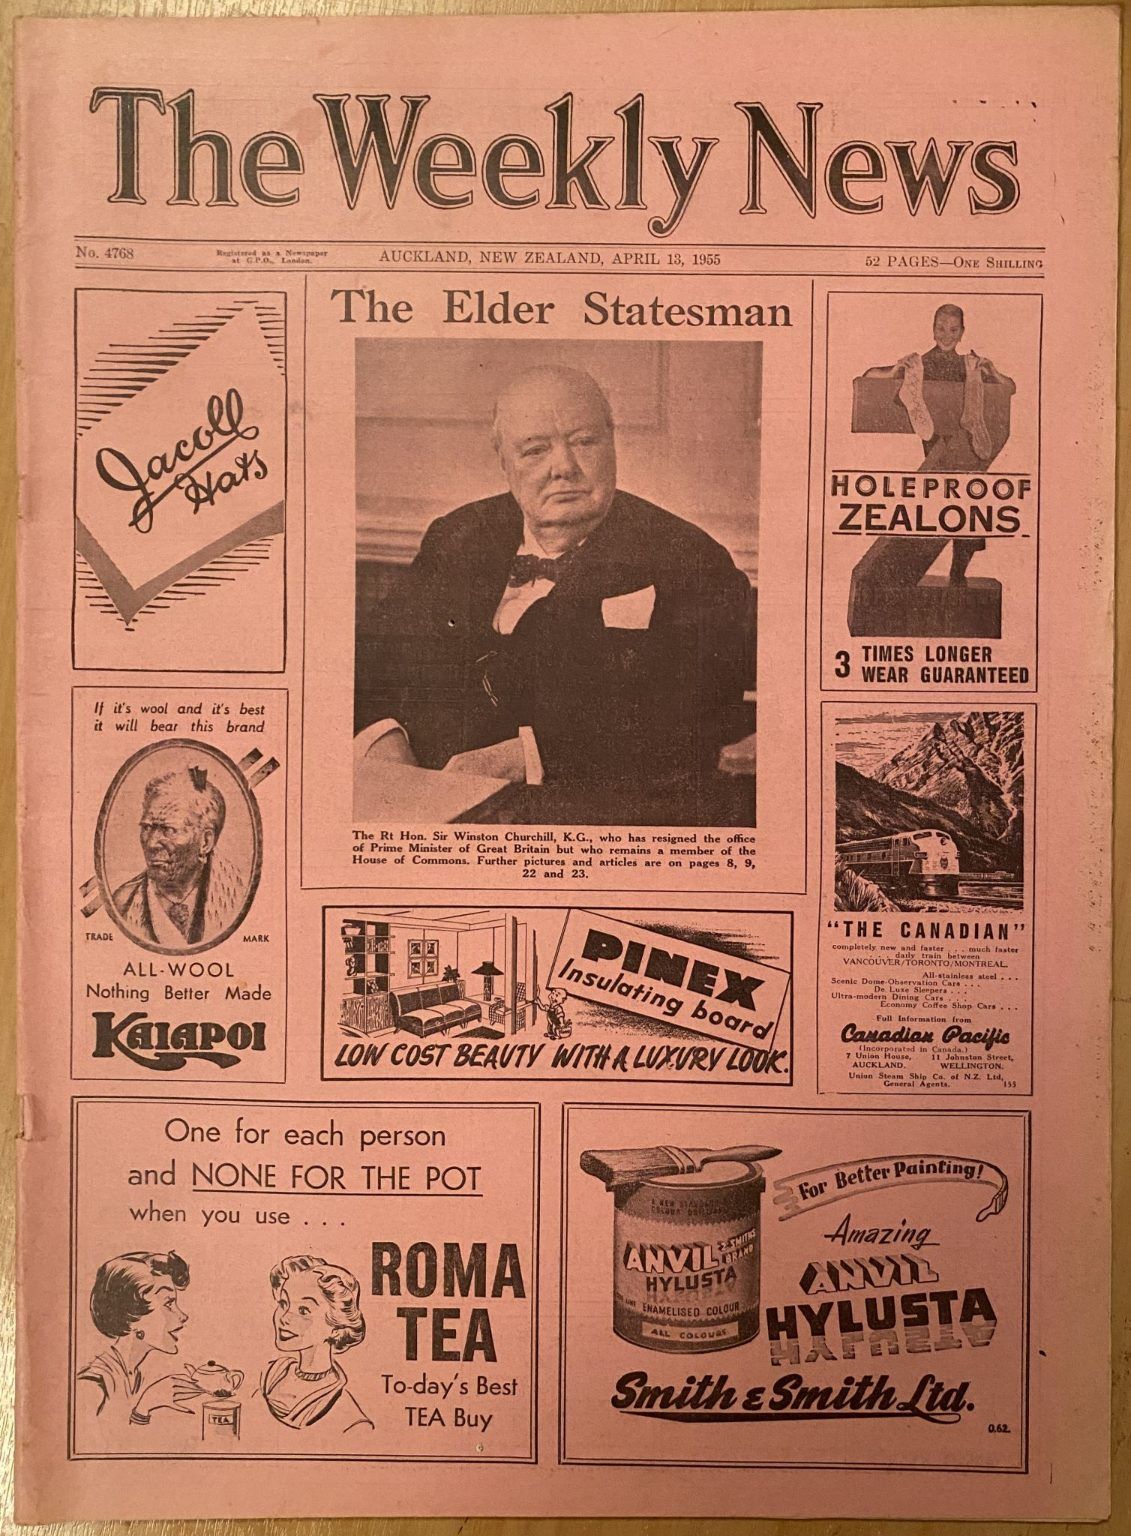 OLD NEWSPAPER: The Weekly News - No. 4768, 13 April 1955